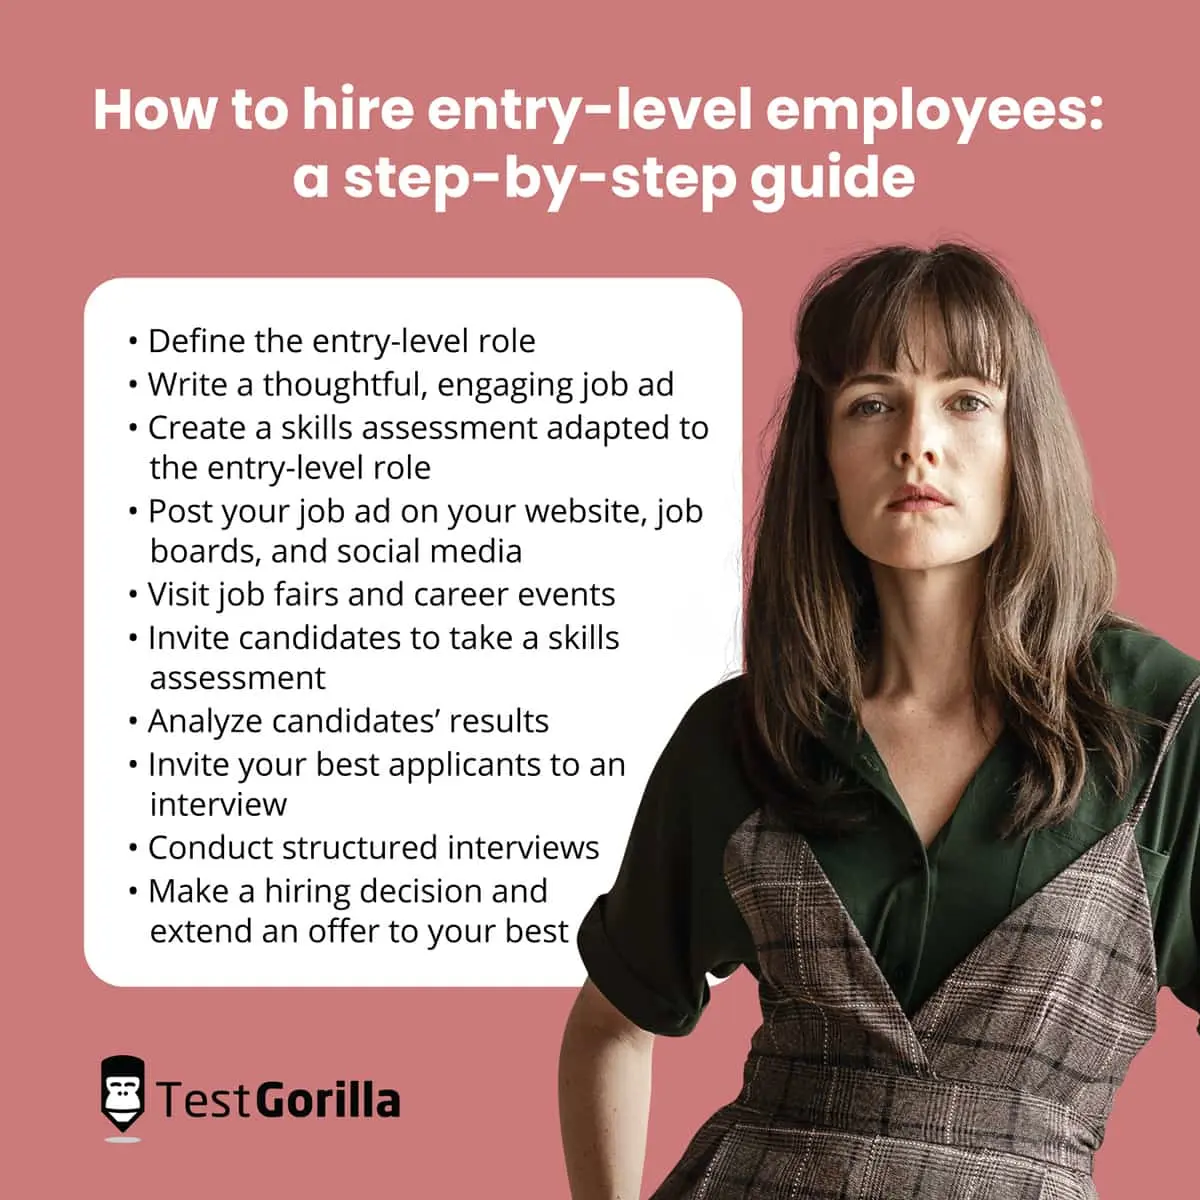 how to hire entry-level employees: a step-by-step guide